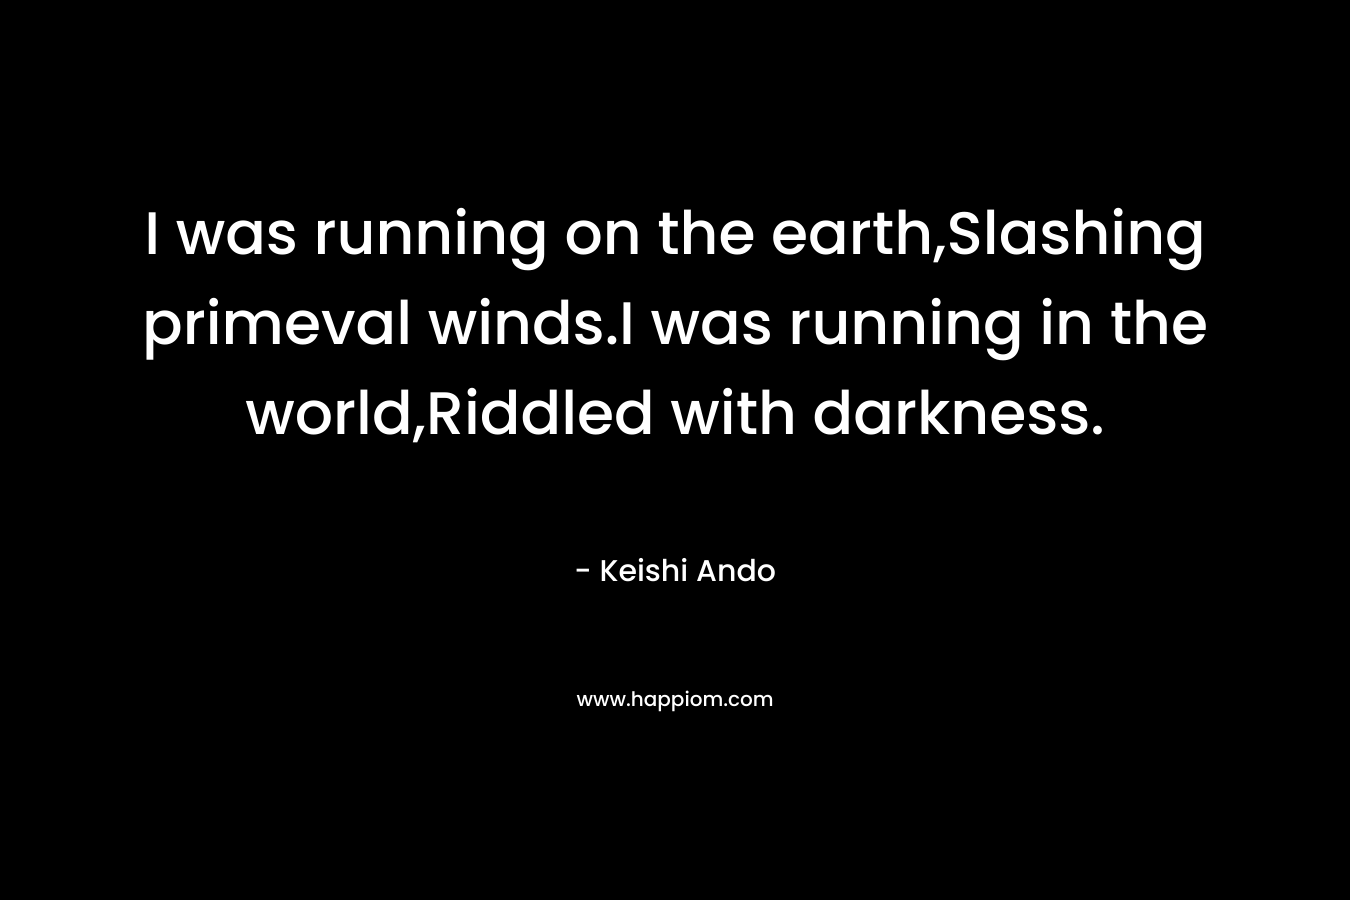 I was running on the earth,Slashing primeval winds.I was running in the world,Riddled with darkness. – Keishi Ando